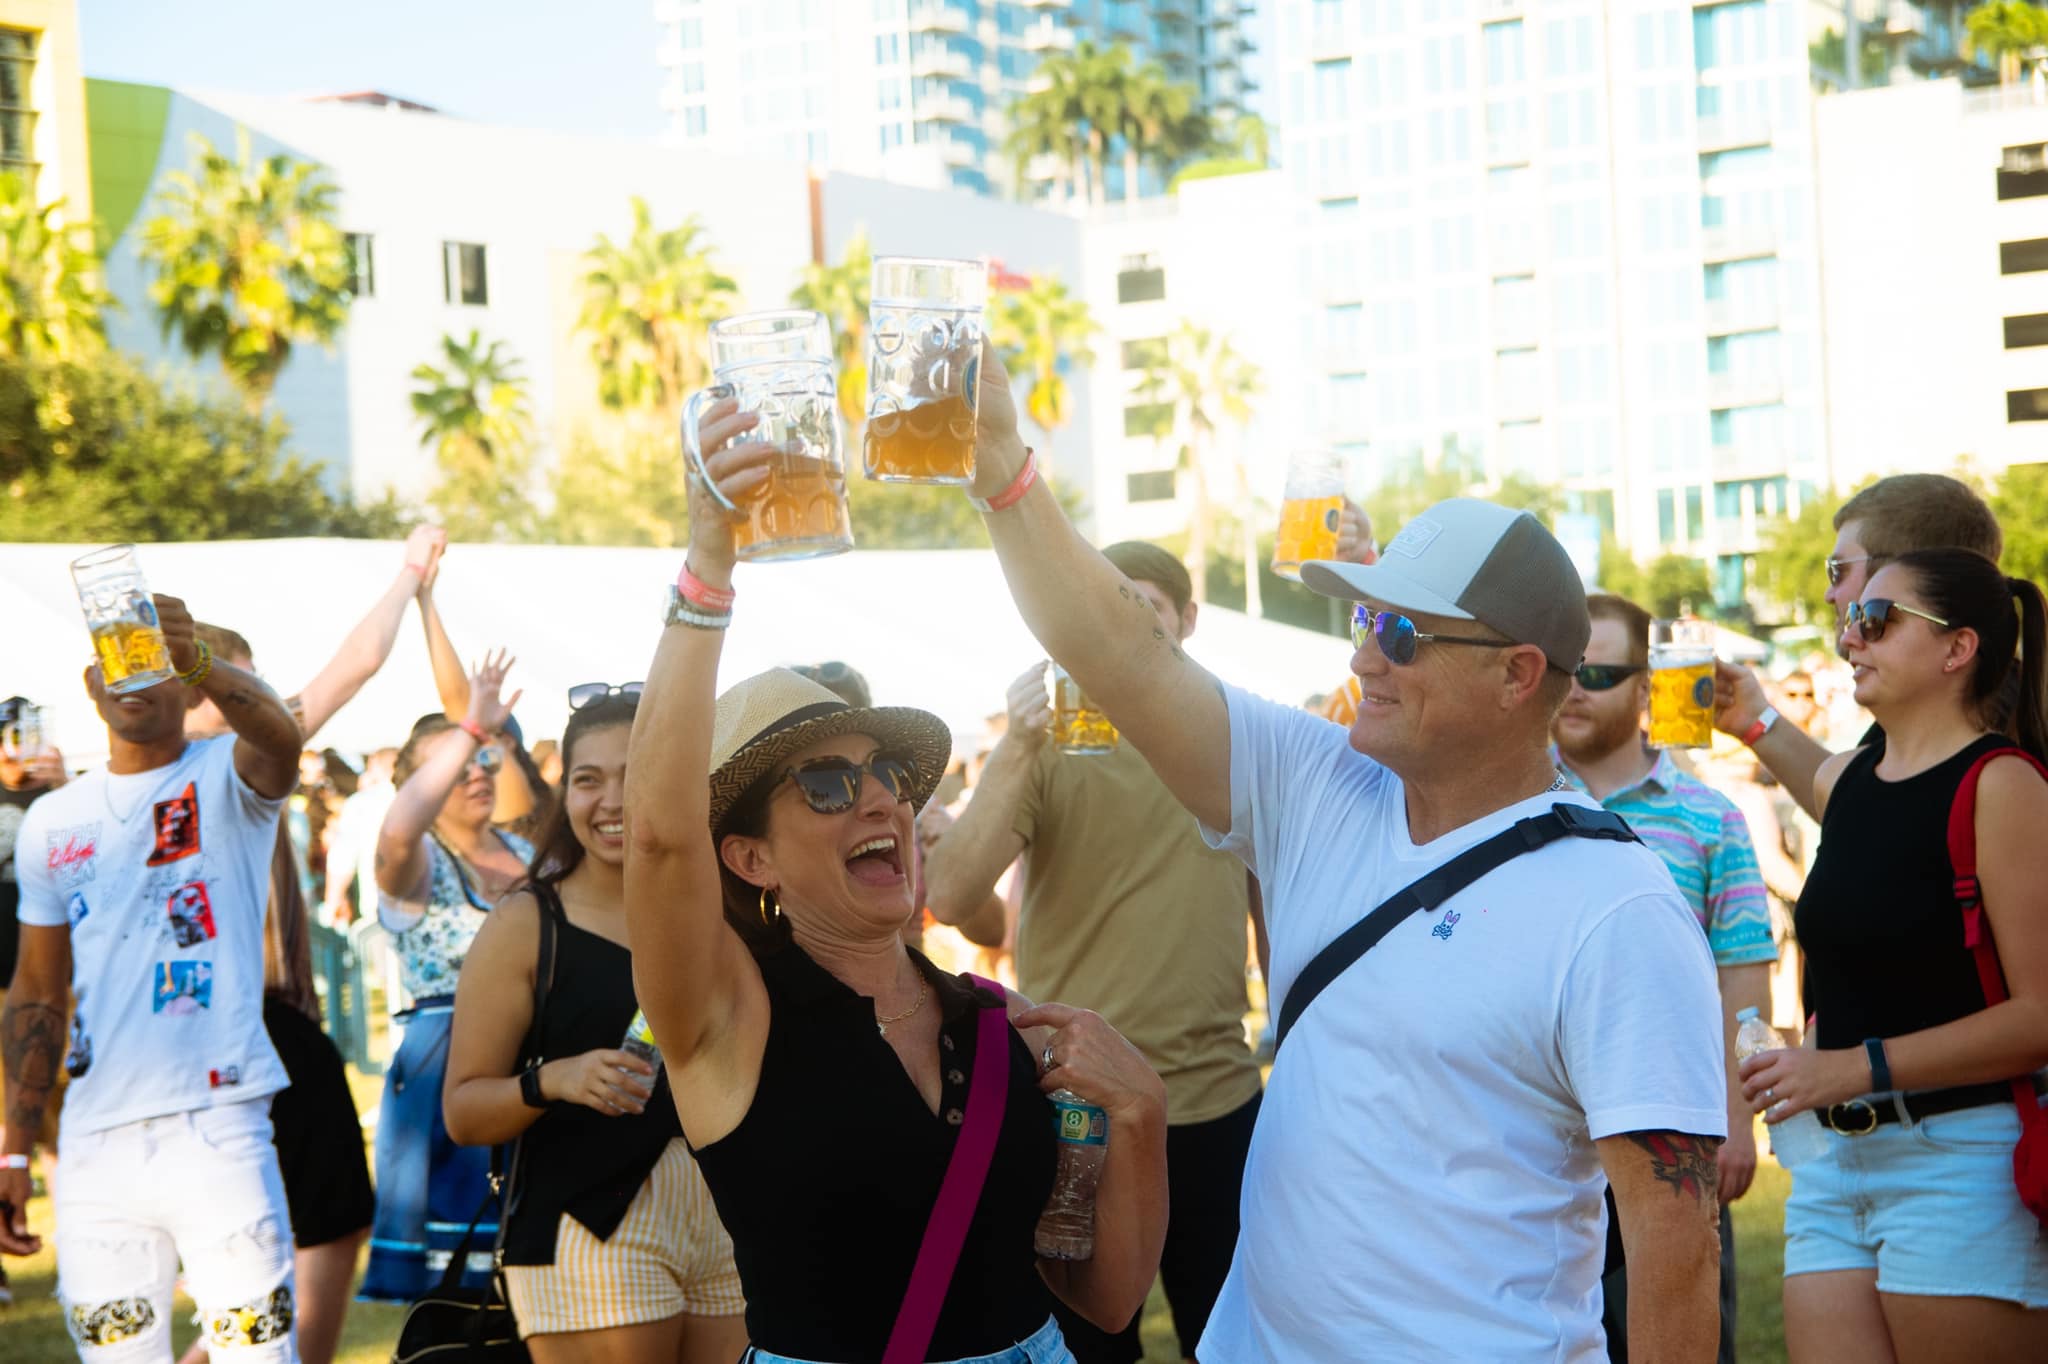 upcoming events in tampa bay - oktoberfest